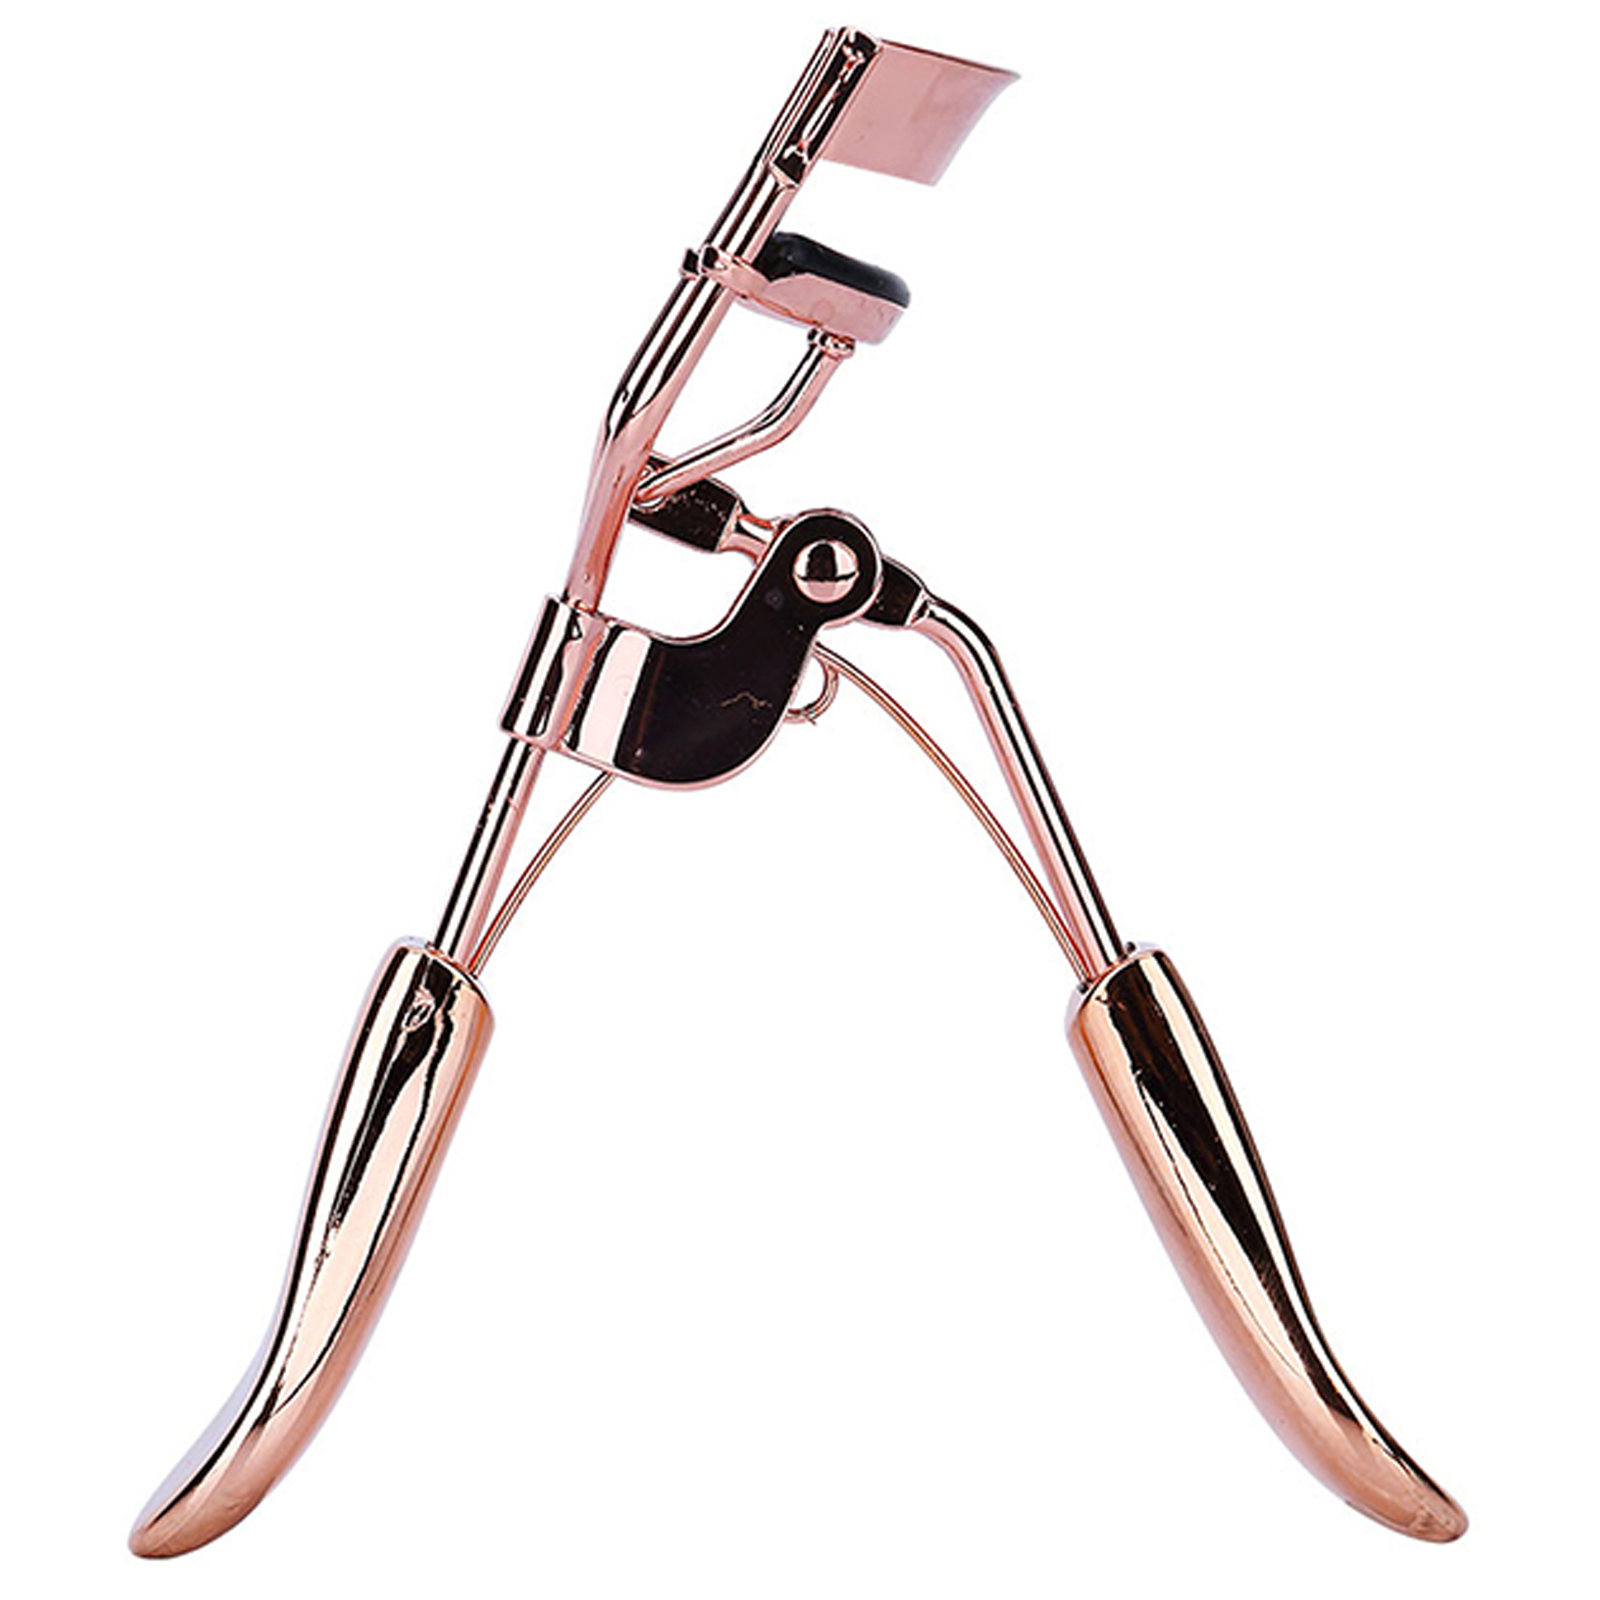 Lifted Lash Curler